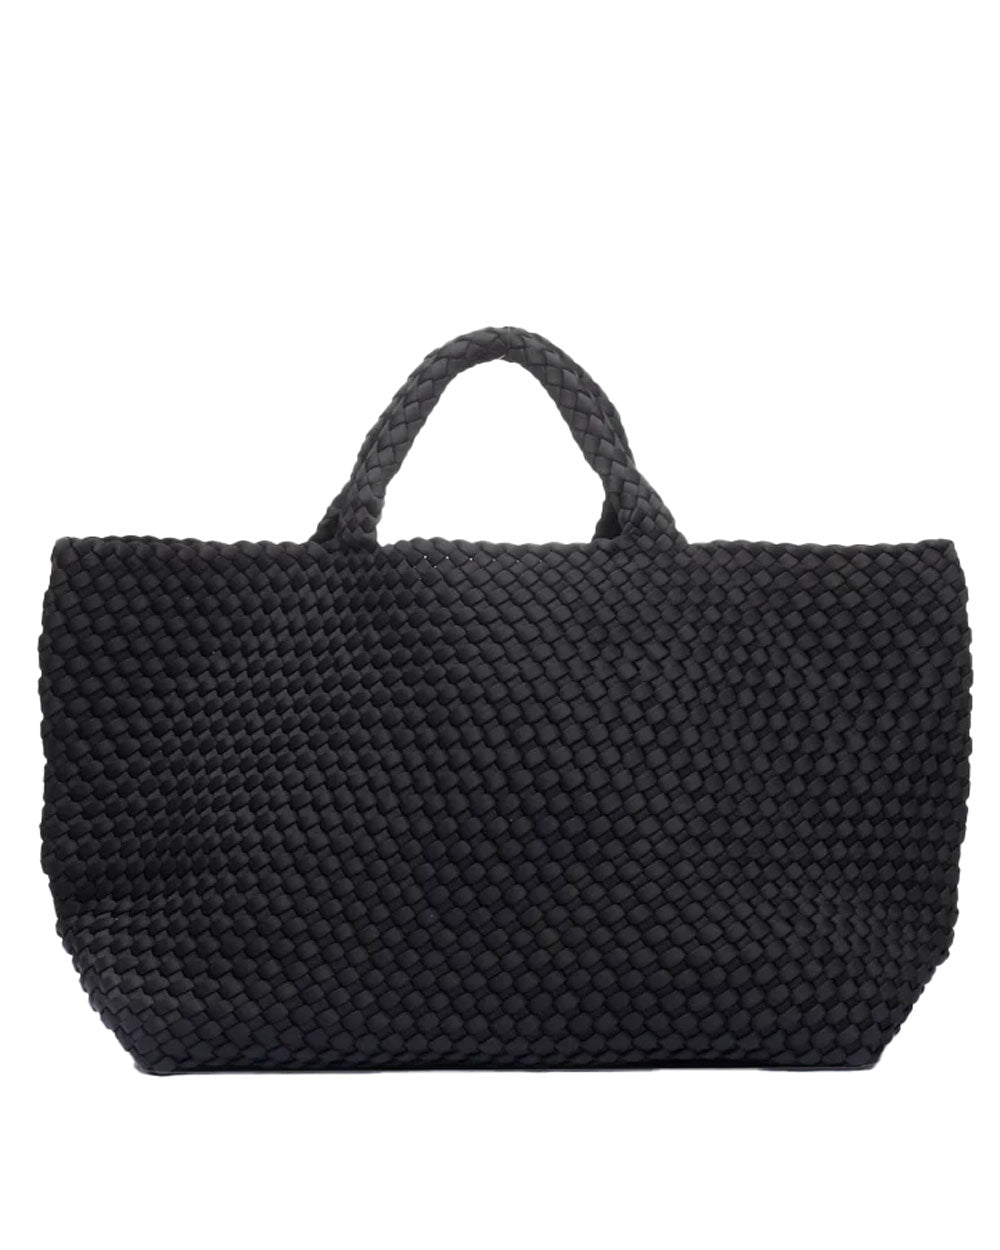 St. Barths Large Tote in Onyx